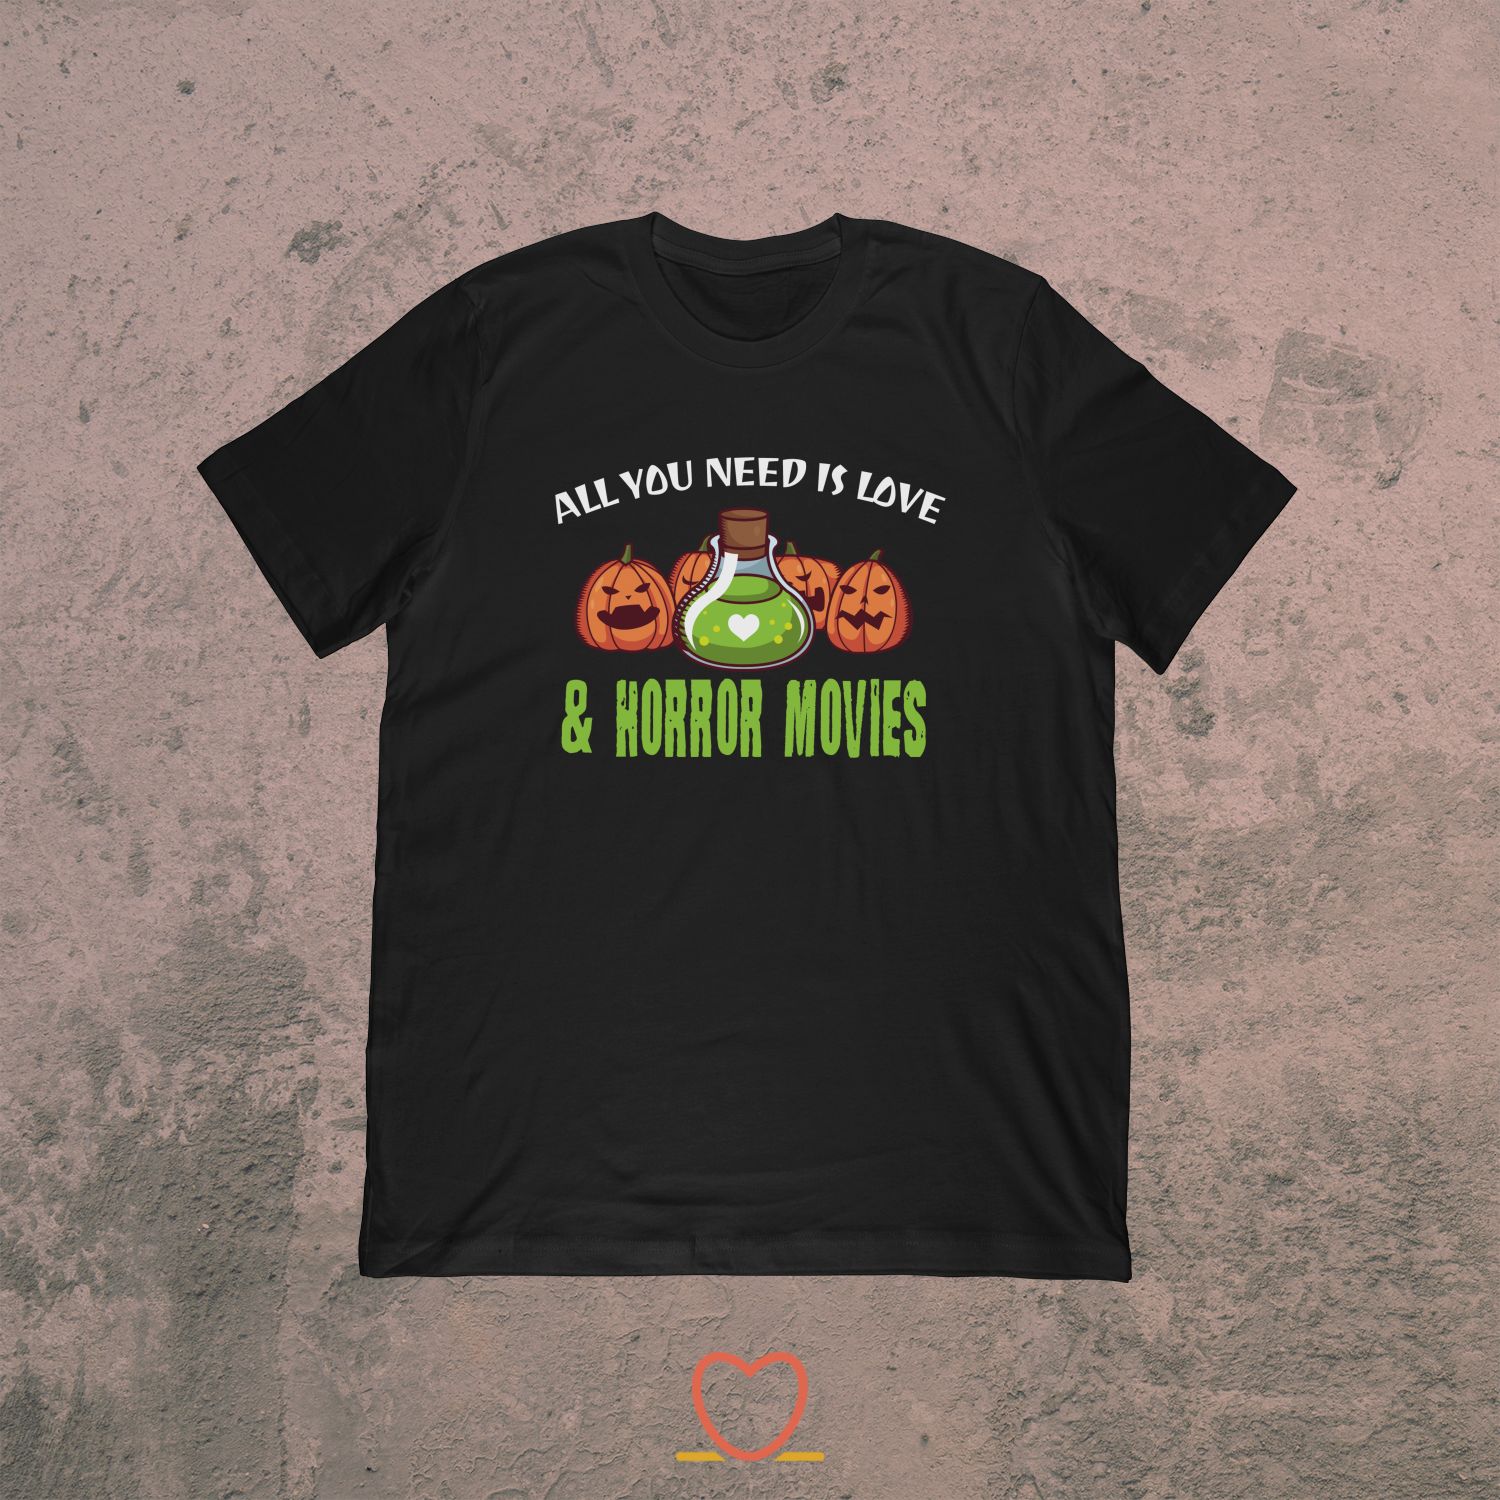 All You Need Is Love & Horror Movies – Funny Frightening Movie Tee